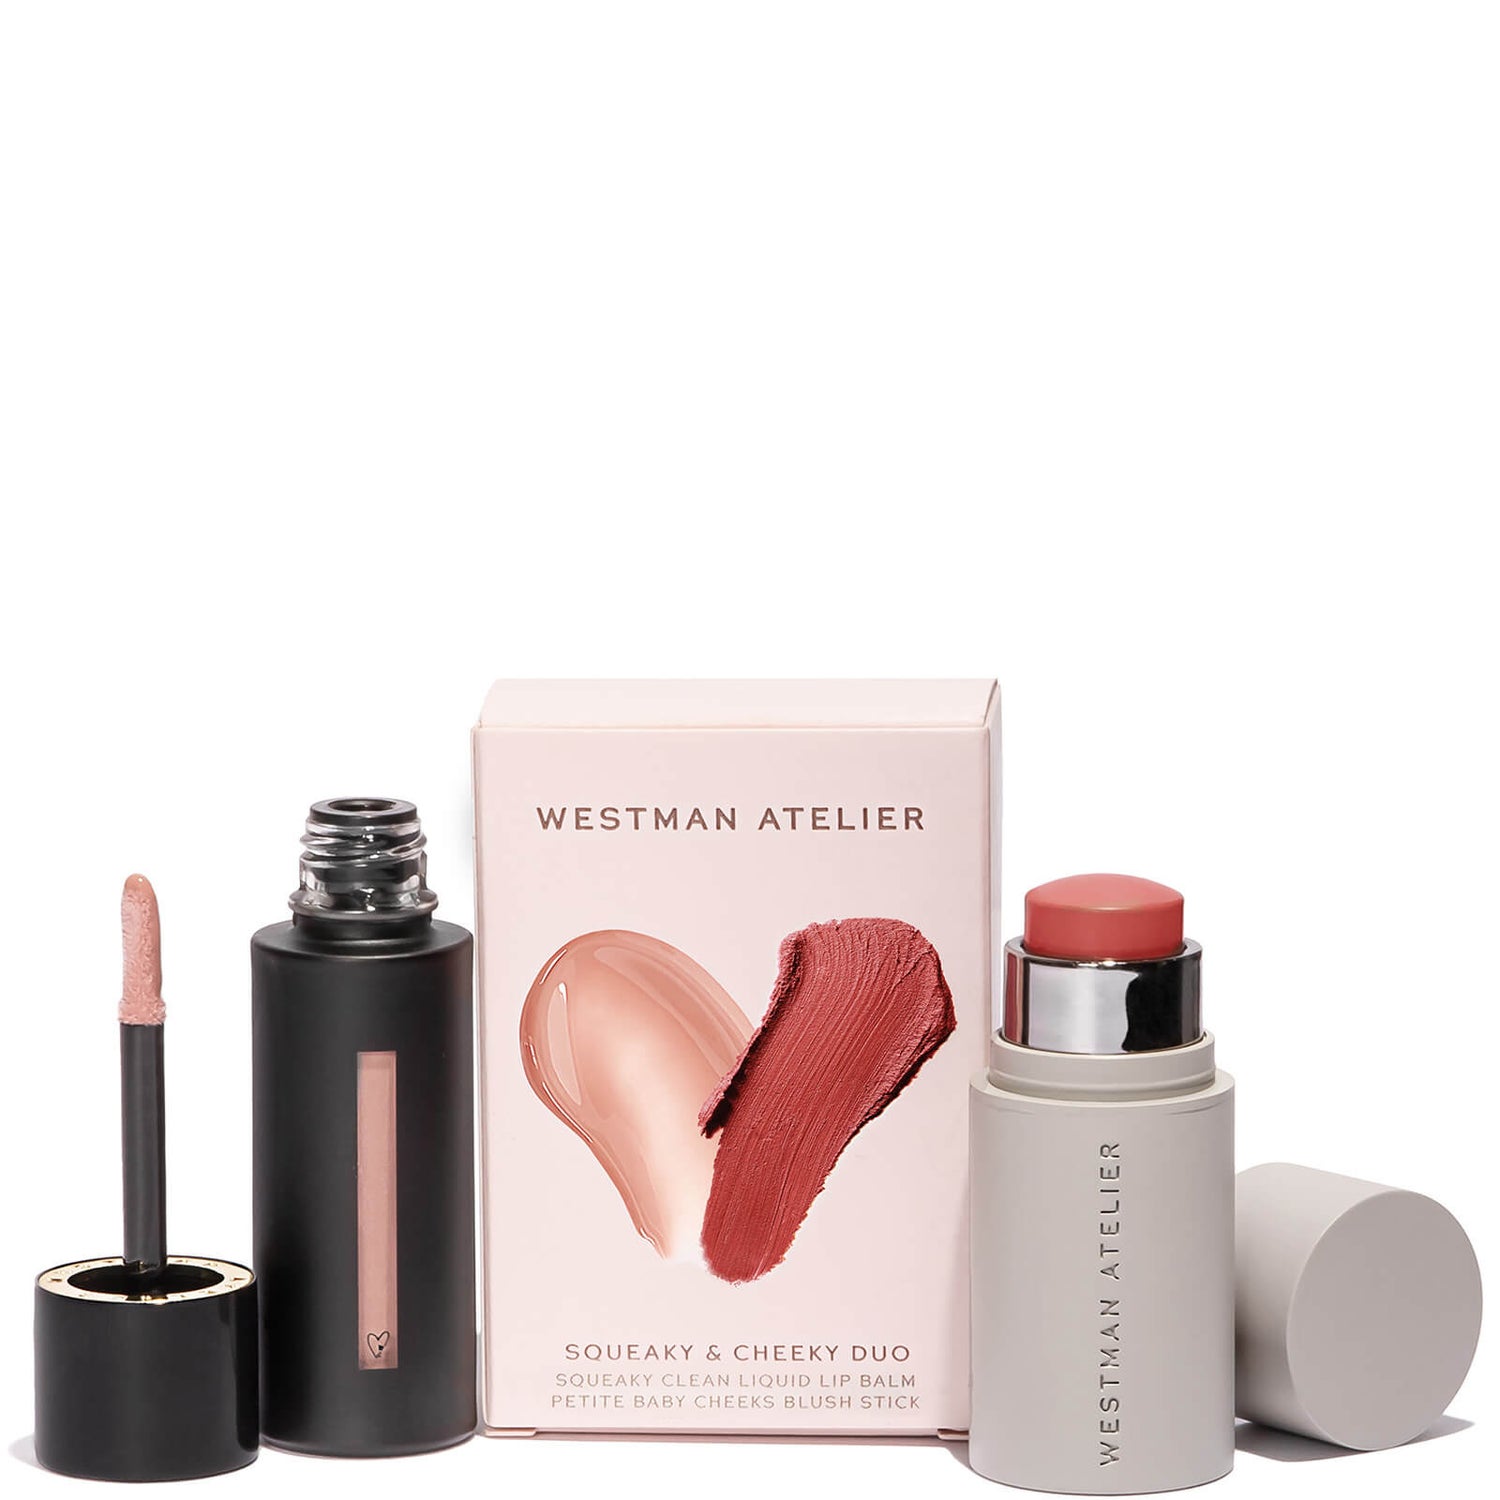 Westman Atelier Squeaky and Cheeky Duo II